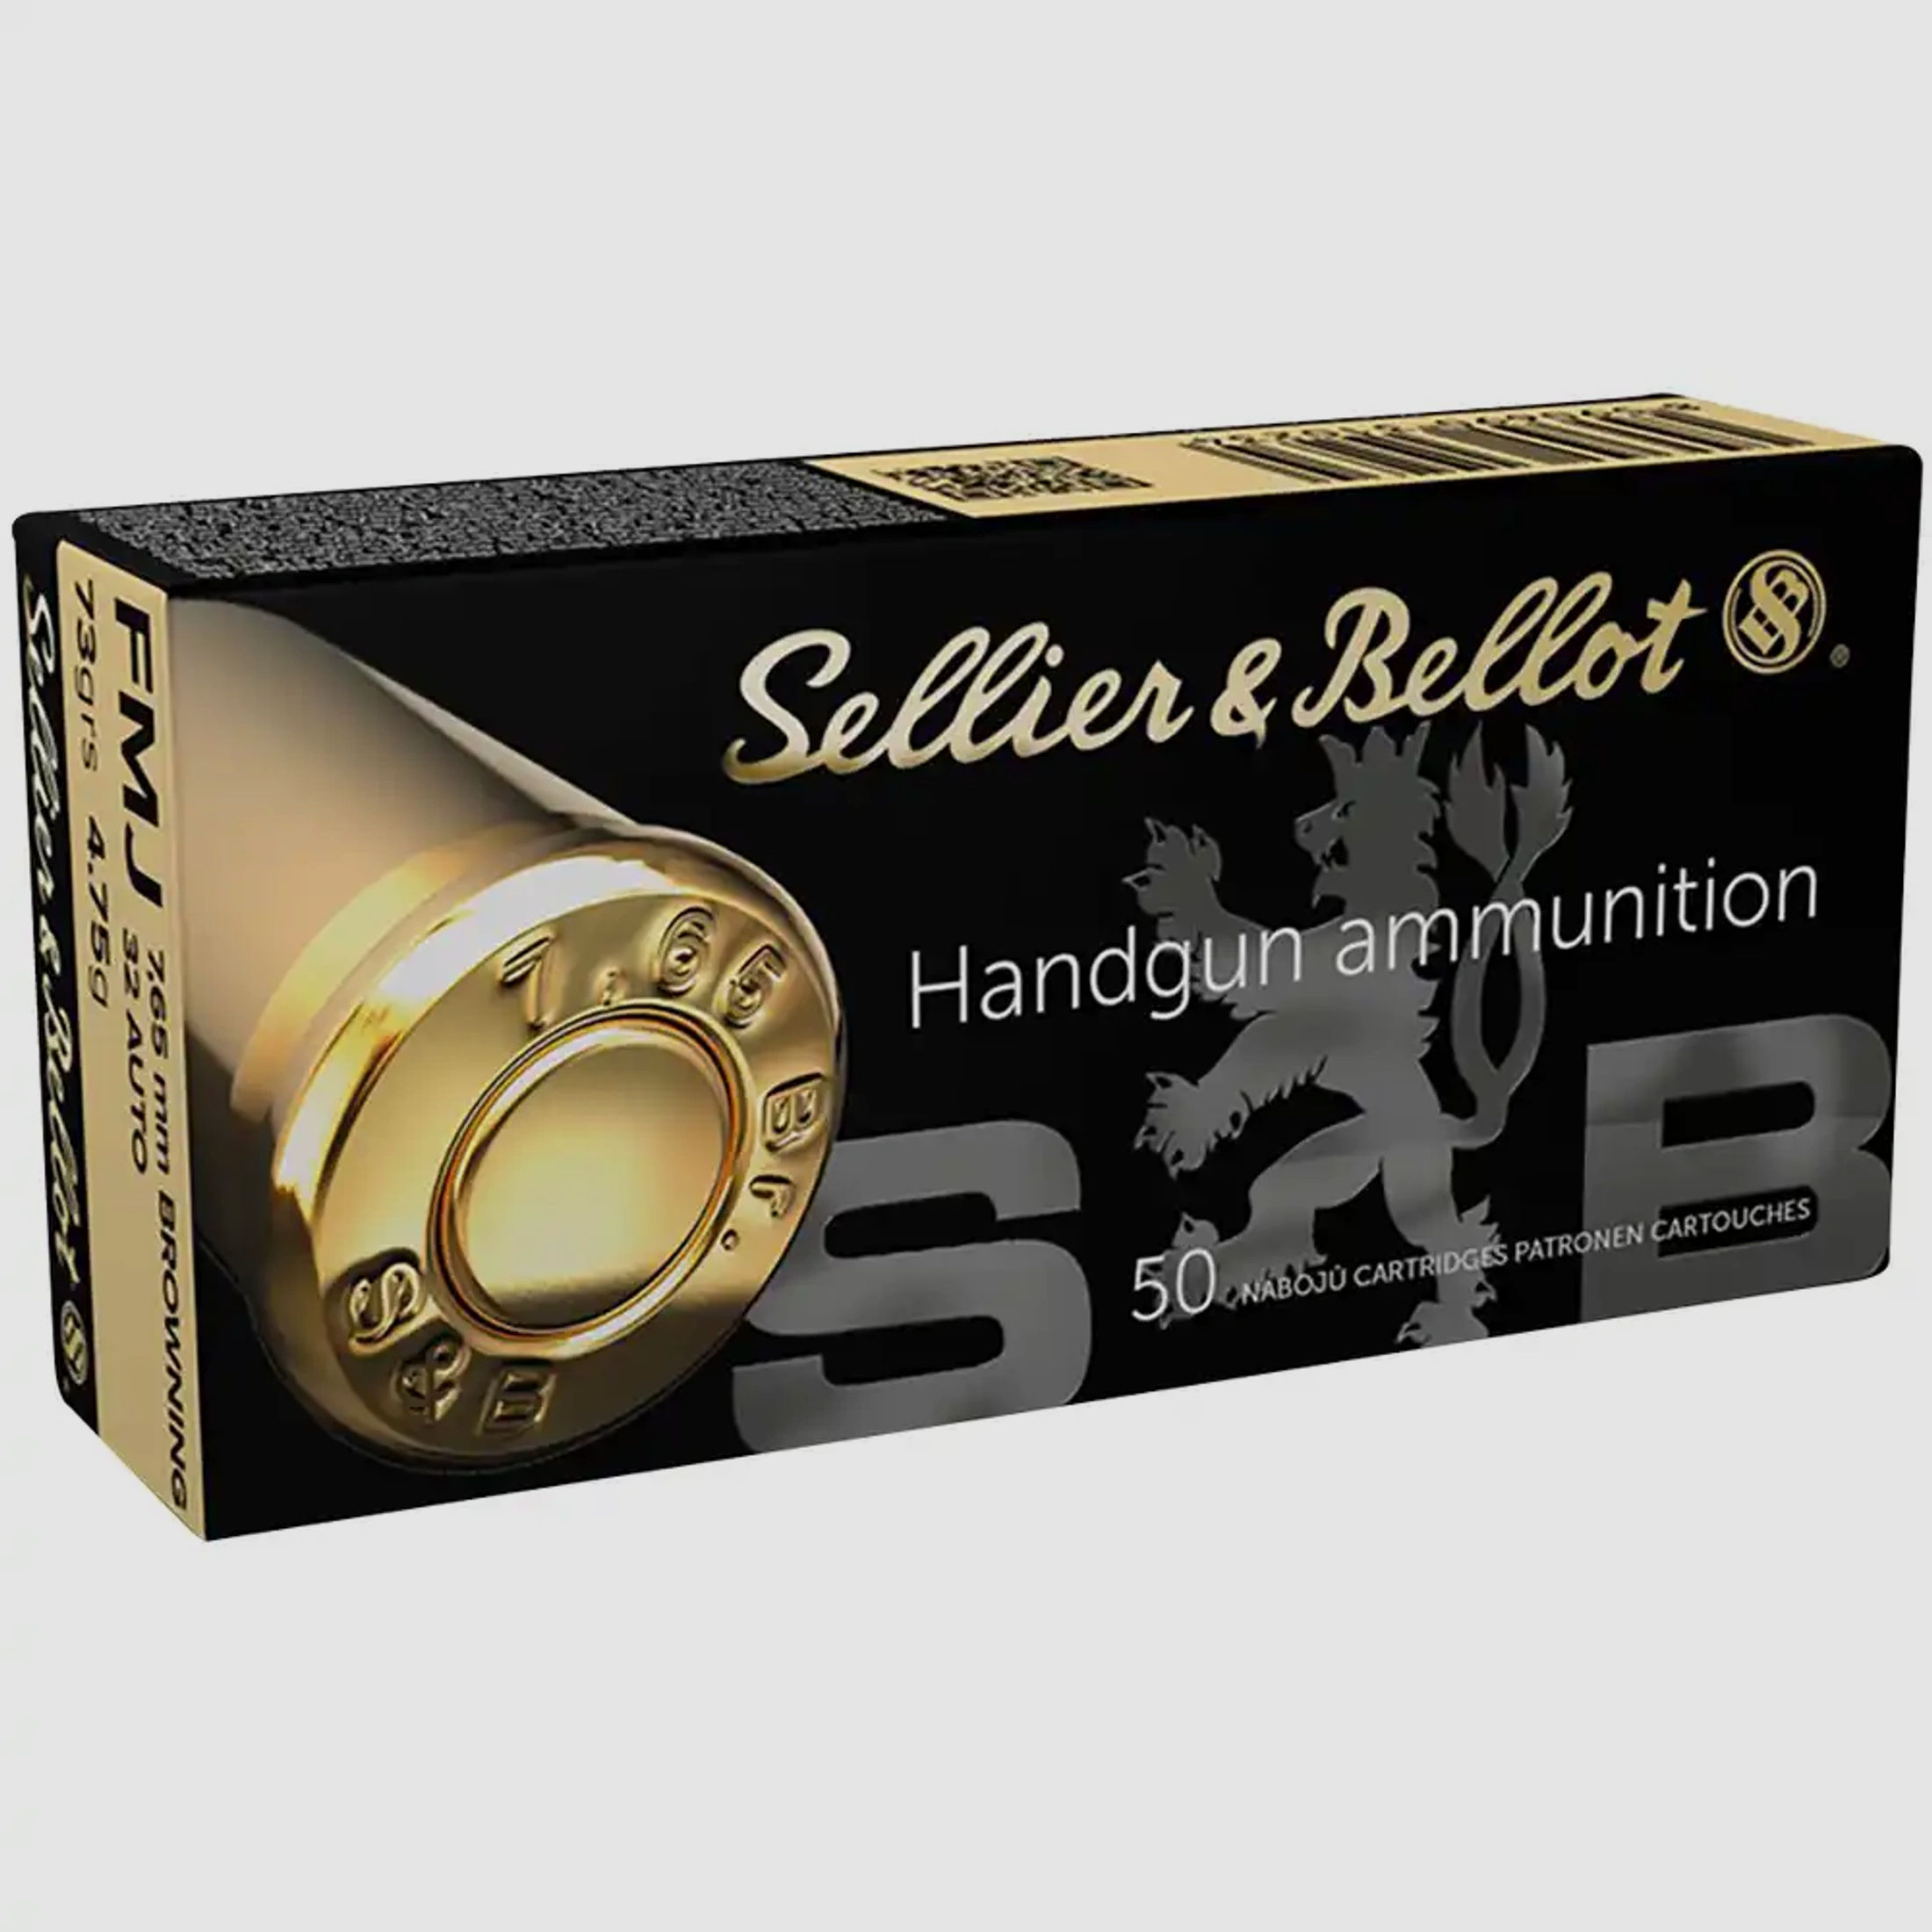 Sellier & Bellot 65174 7,65 Browning Vollmantel 4,75g 73grs.